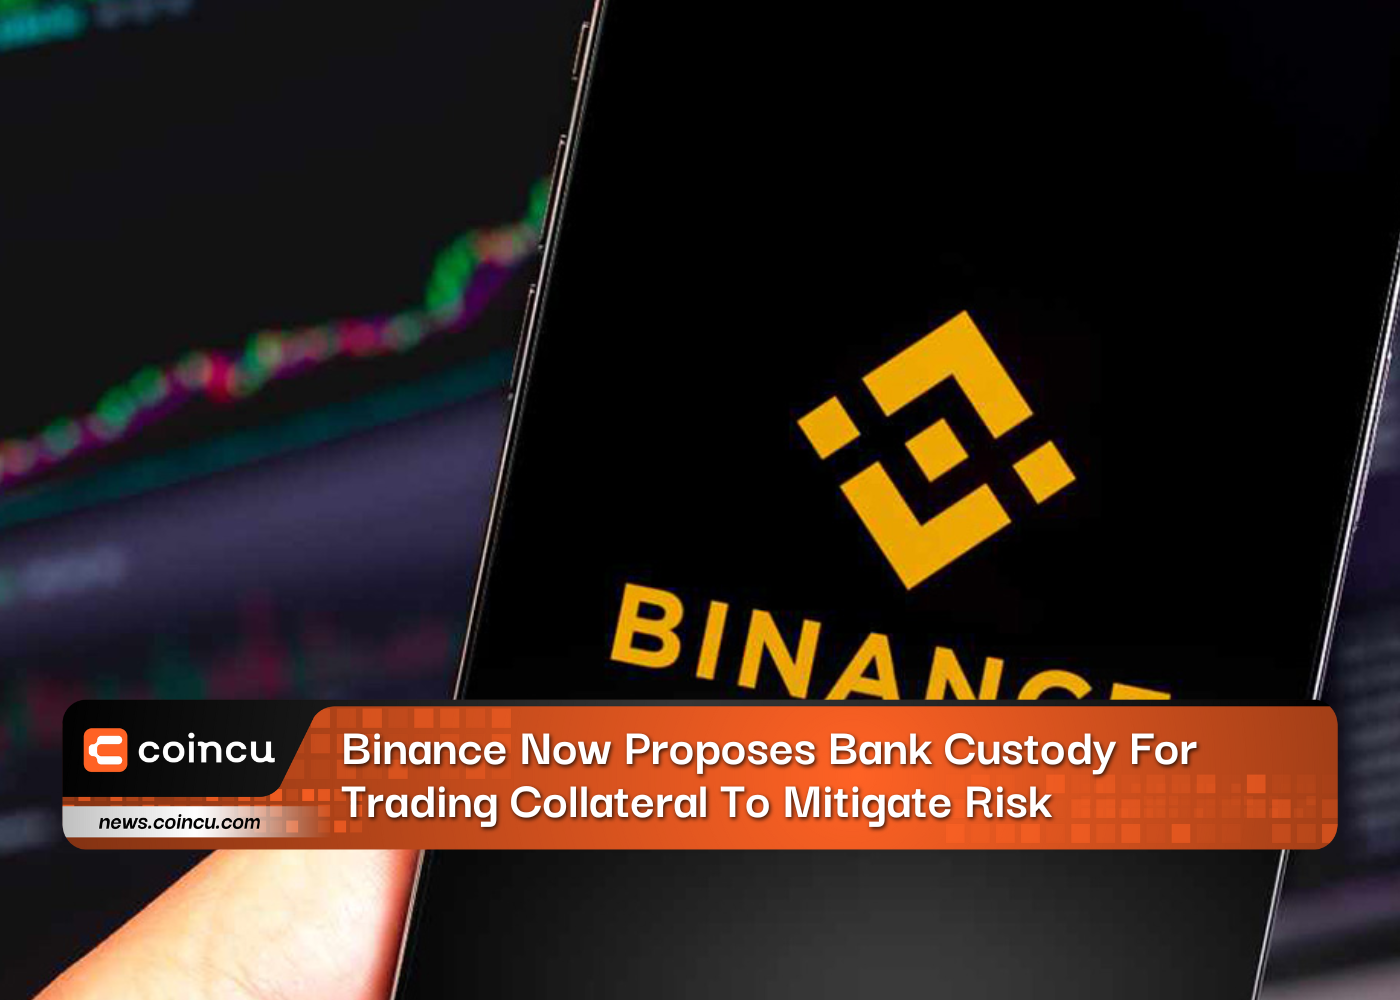 Binance Now Proposes Bank Custody For Trading Collateral To Mitigate Risk